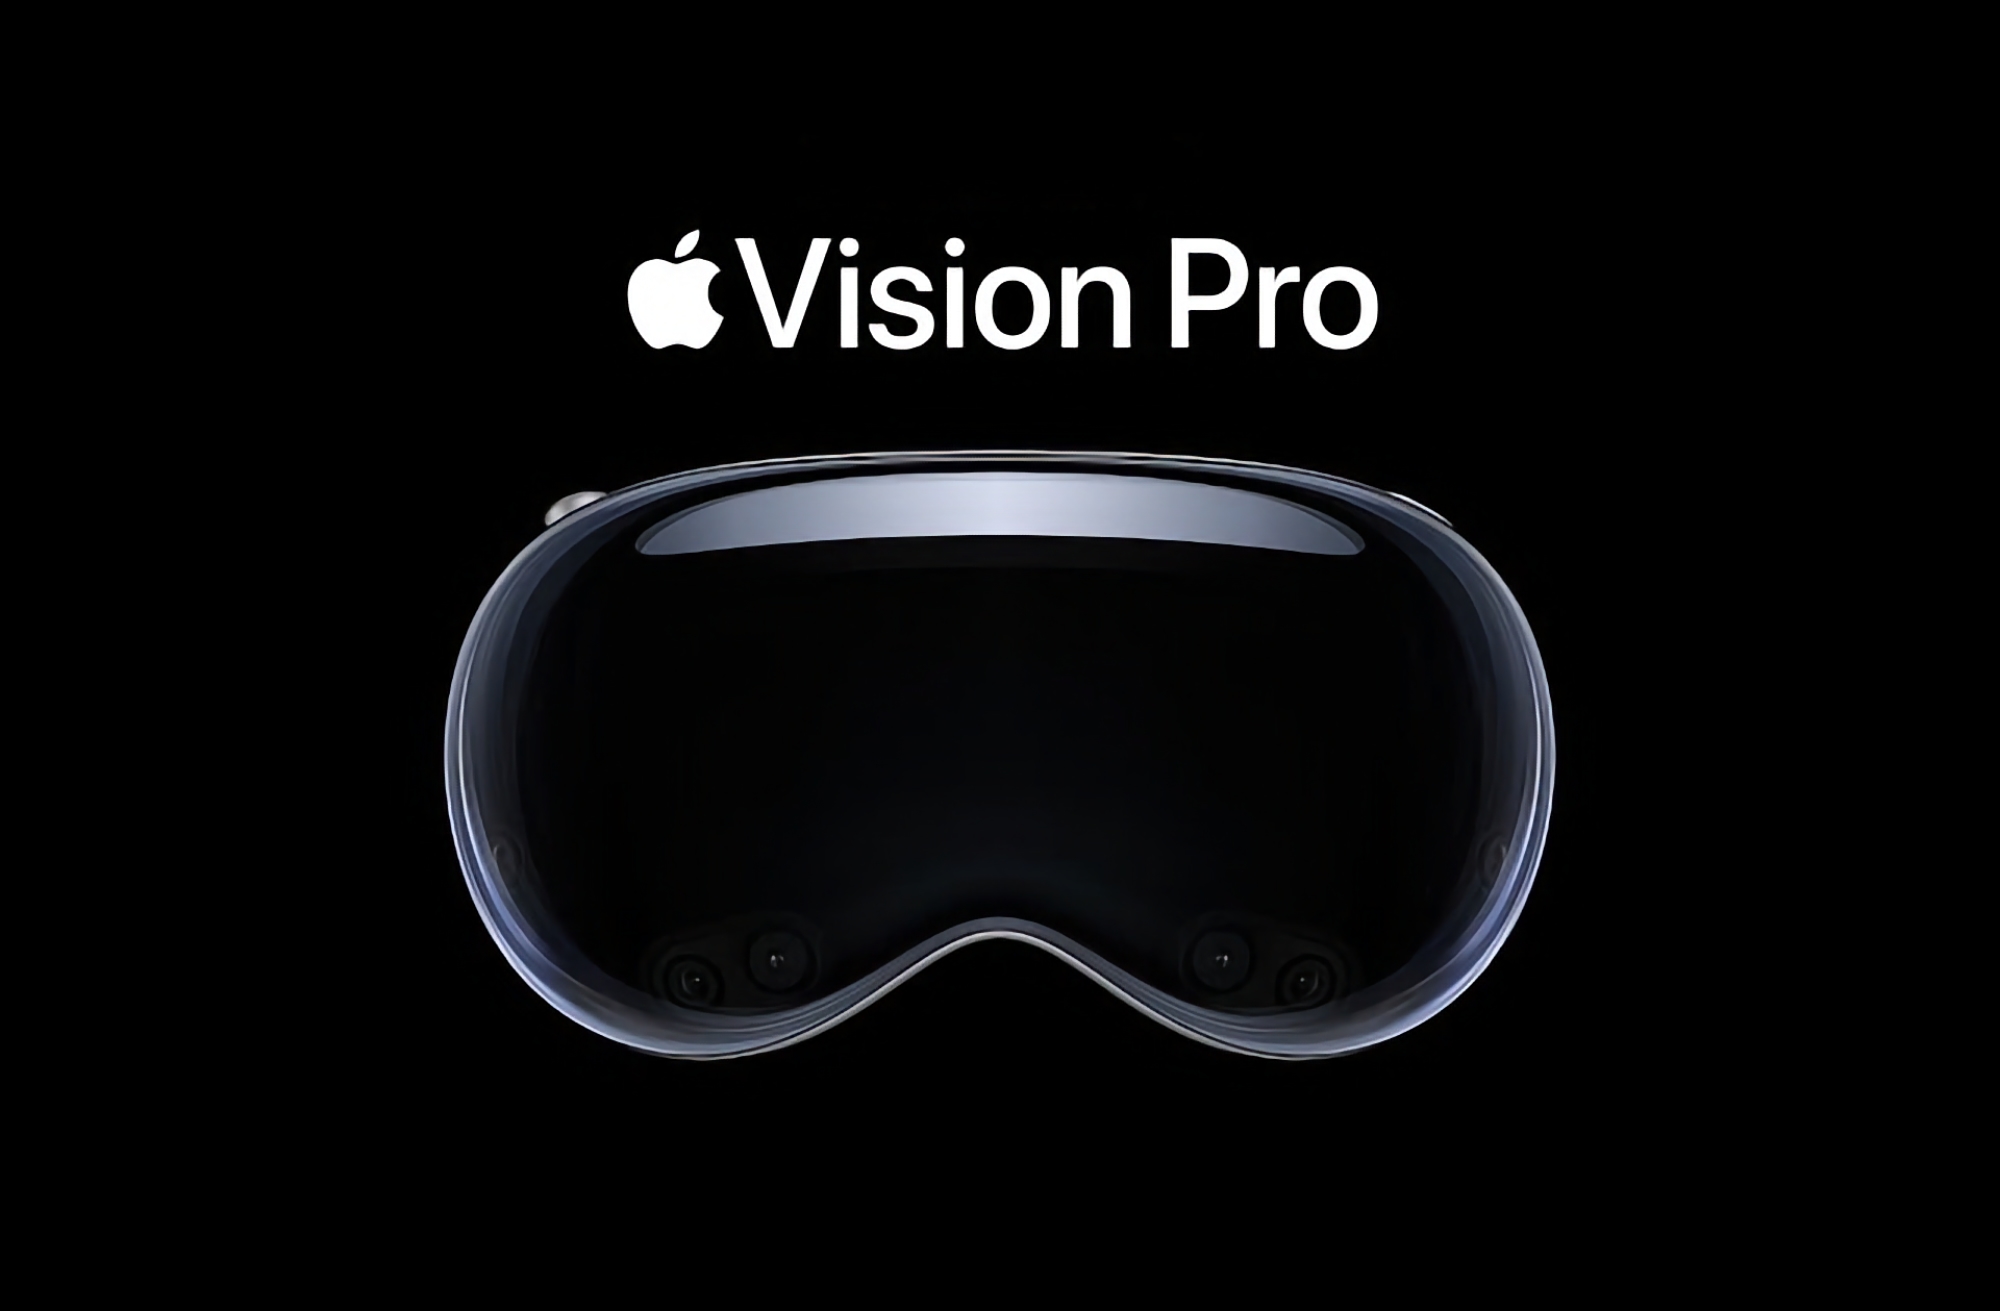 Rumour: Apple will release the Vision Pro headset on January 26 or 27